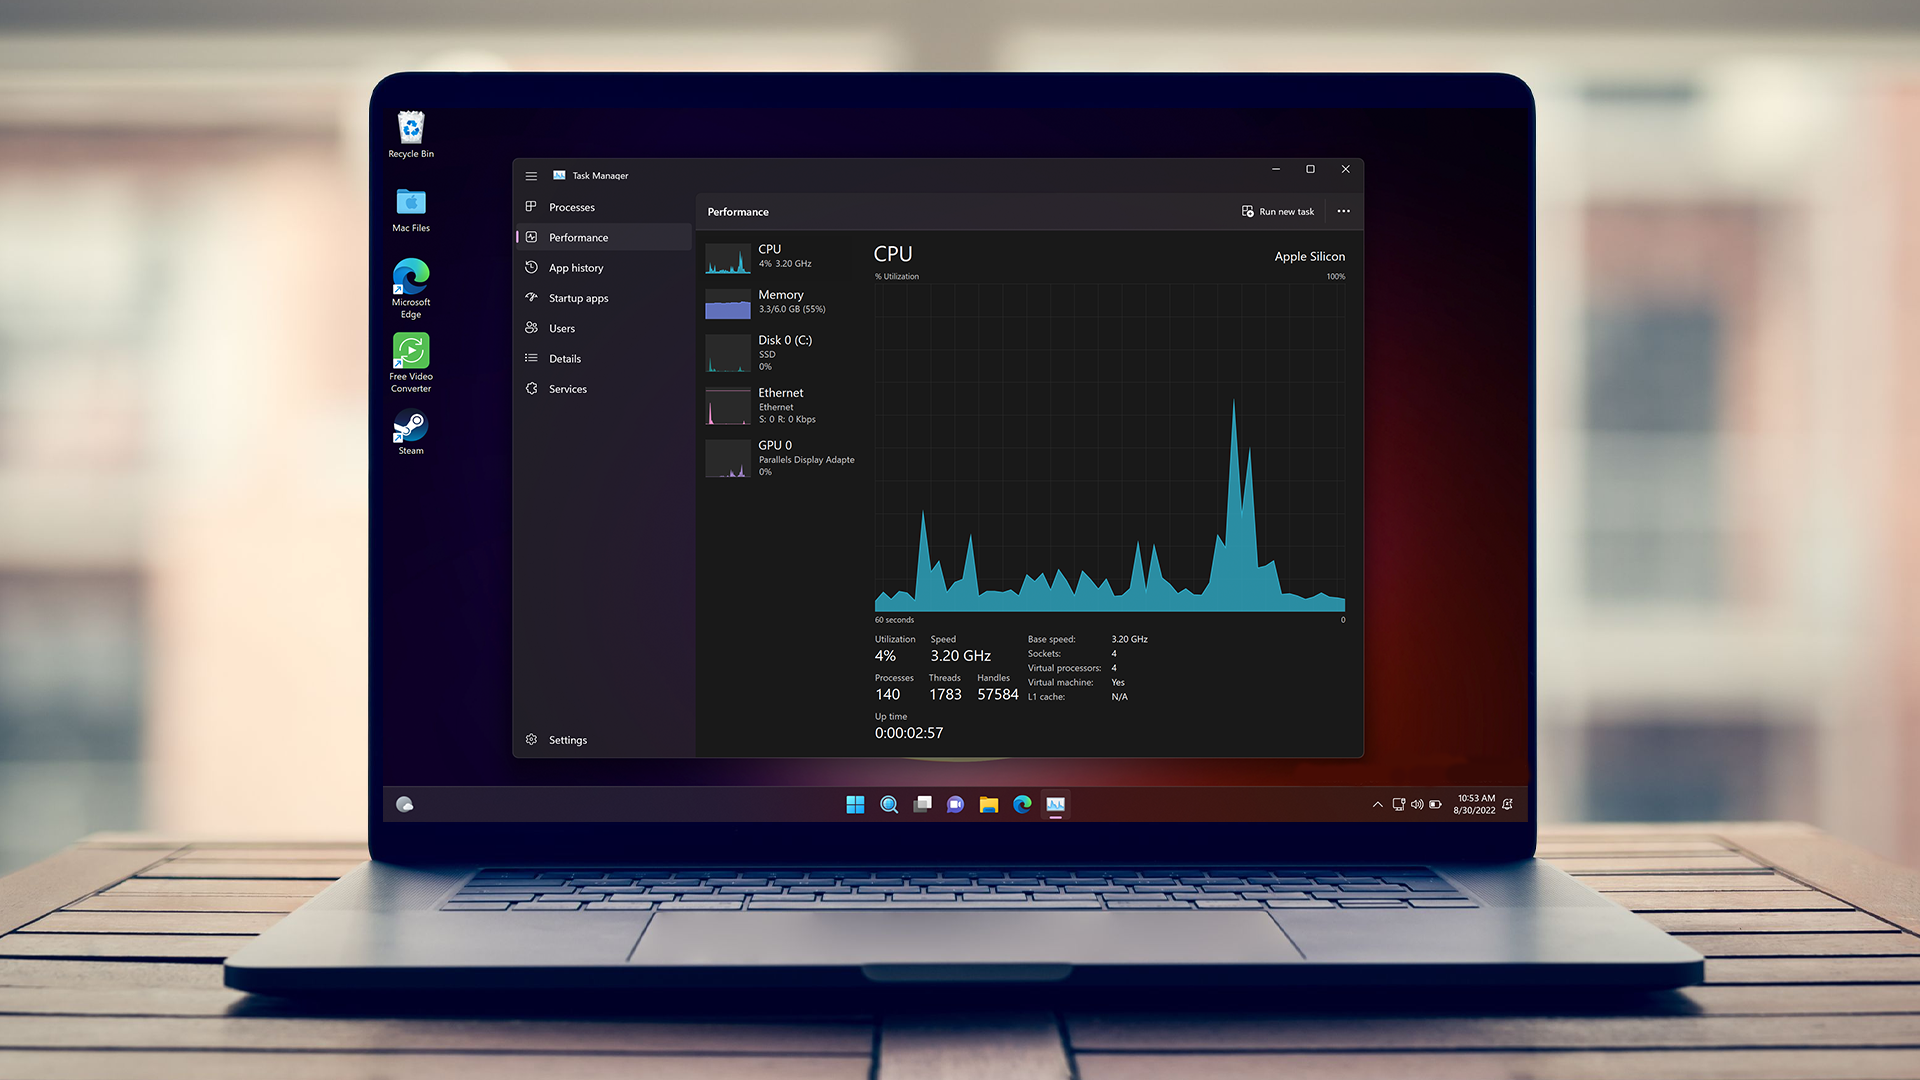 The new Windows 11 Task Manager